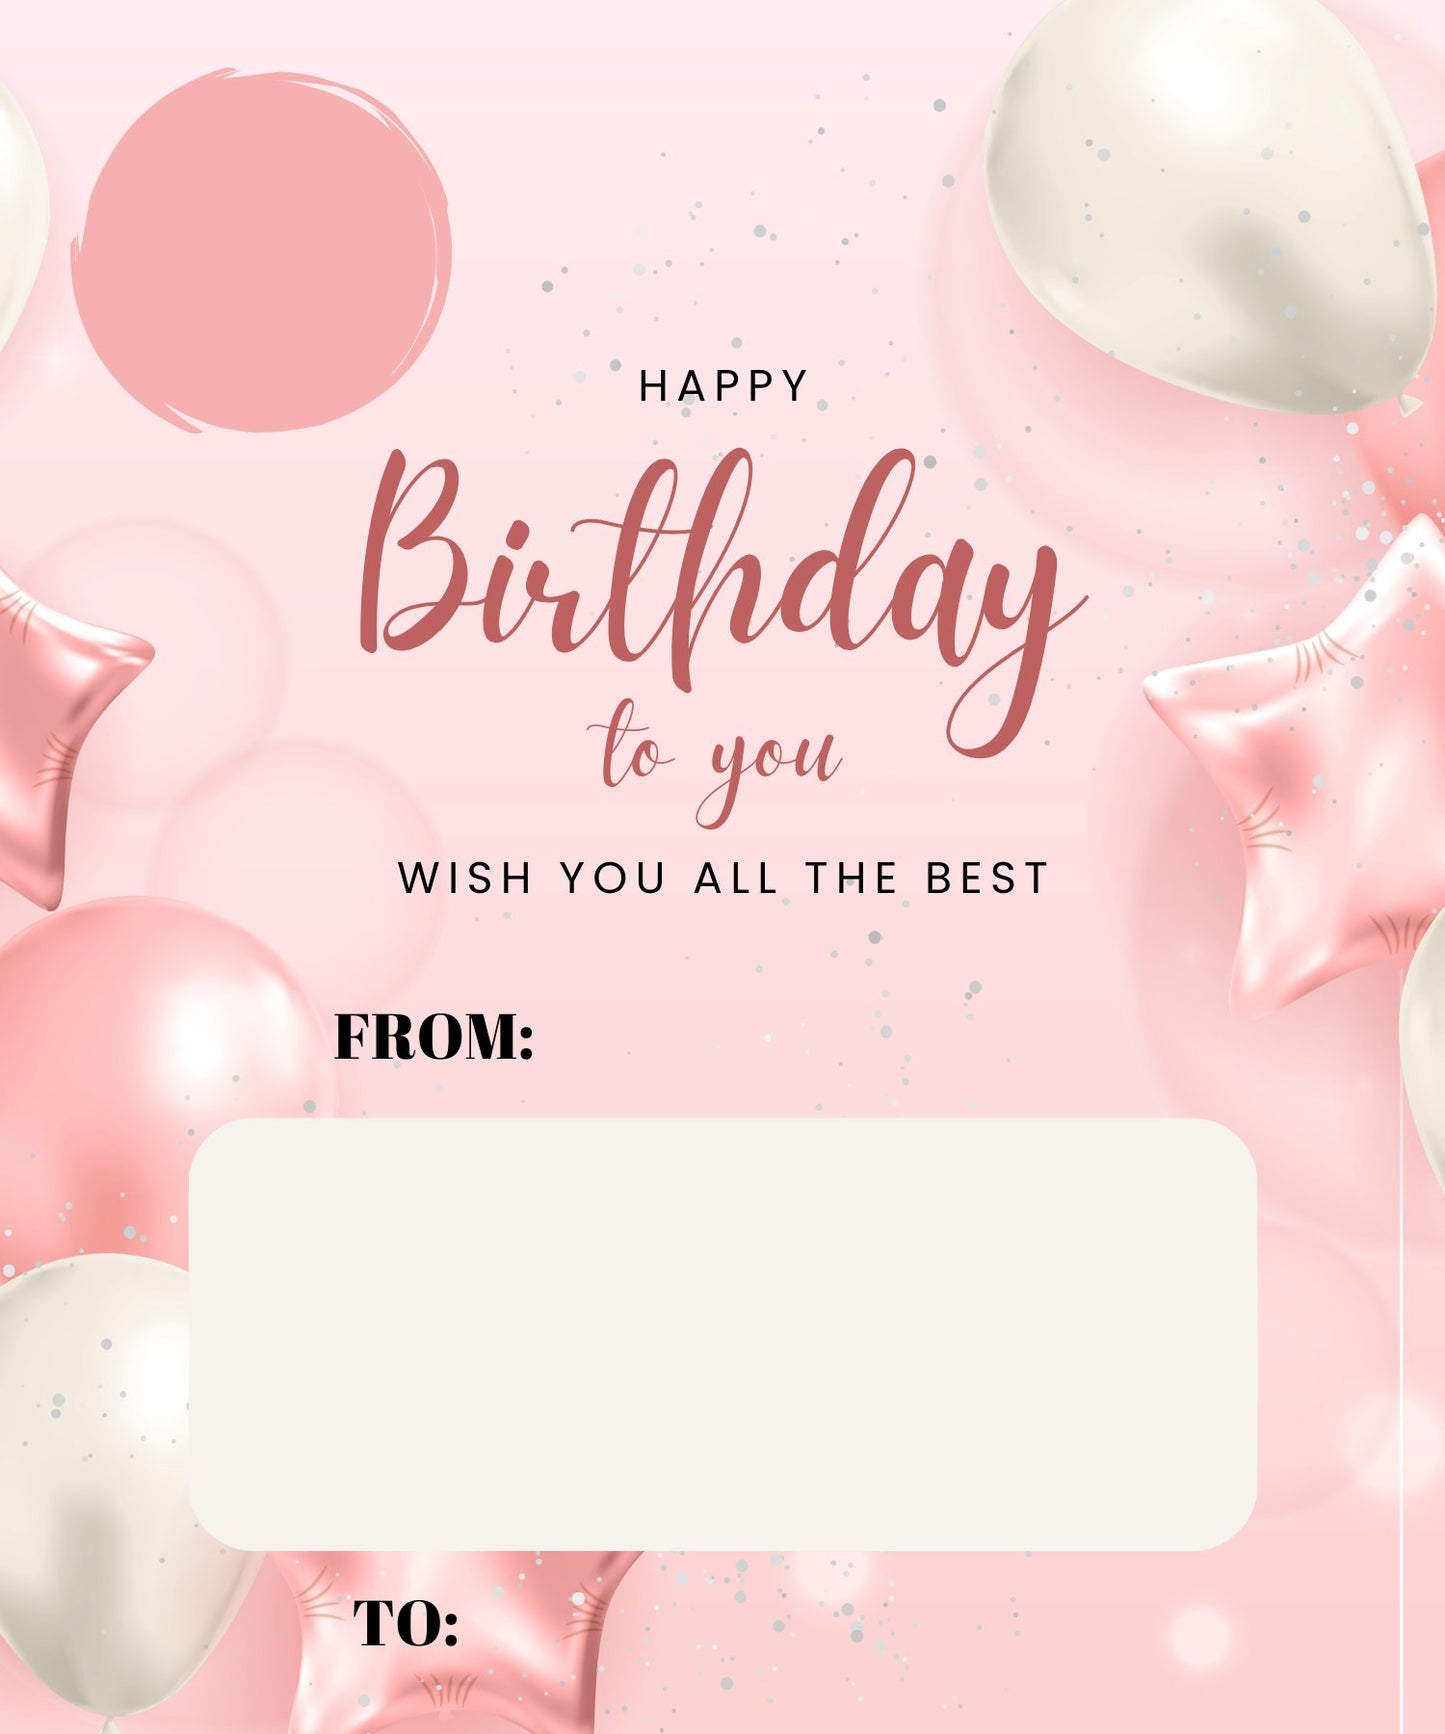 Happy Birthday Personalized Money Cash Holder Gift Card Party Supplies Personalize It By Bel 